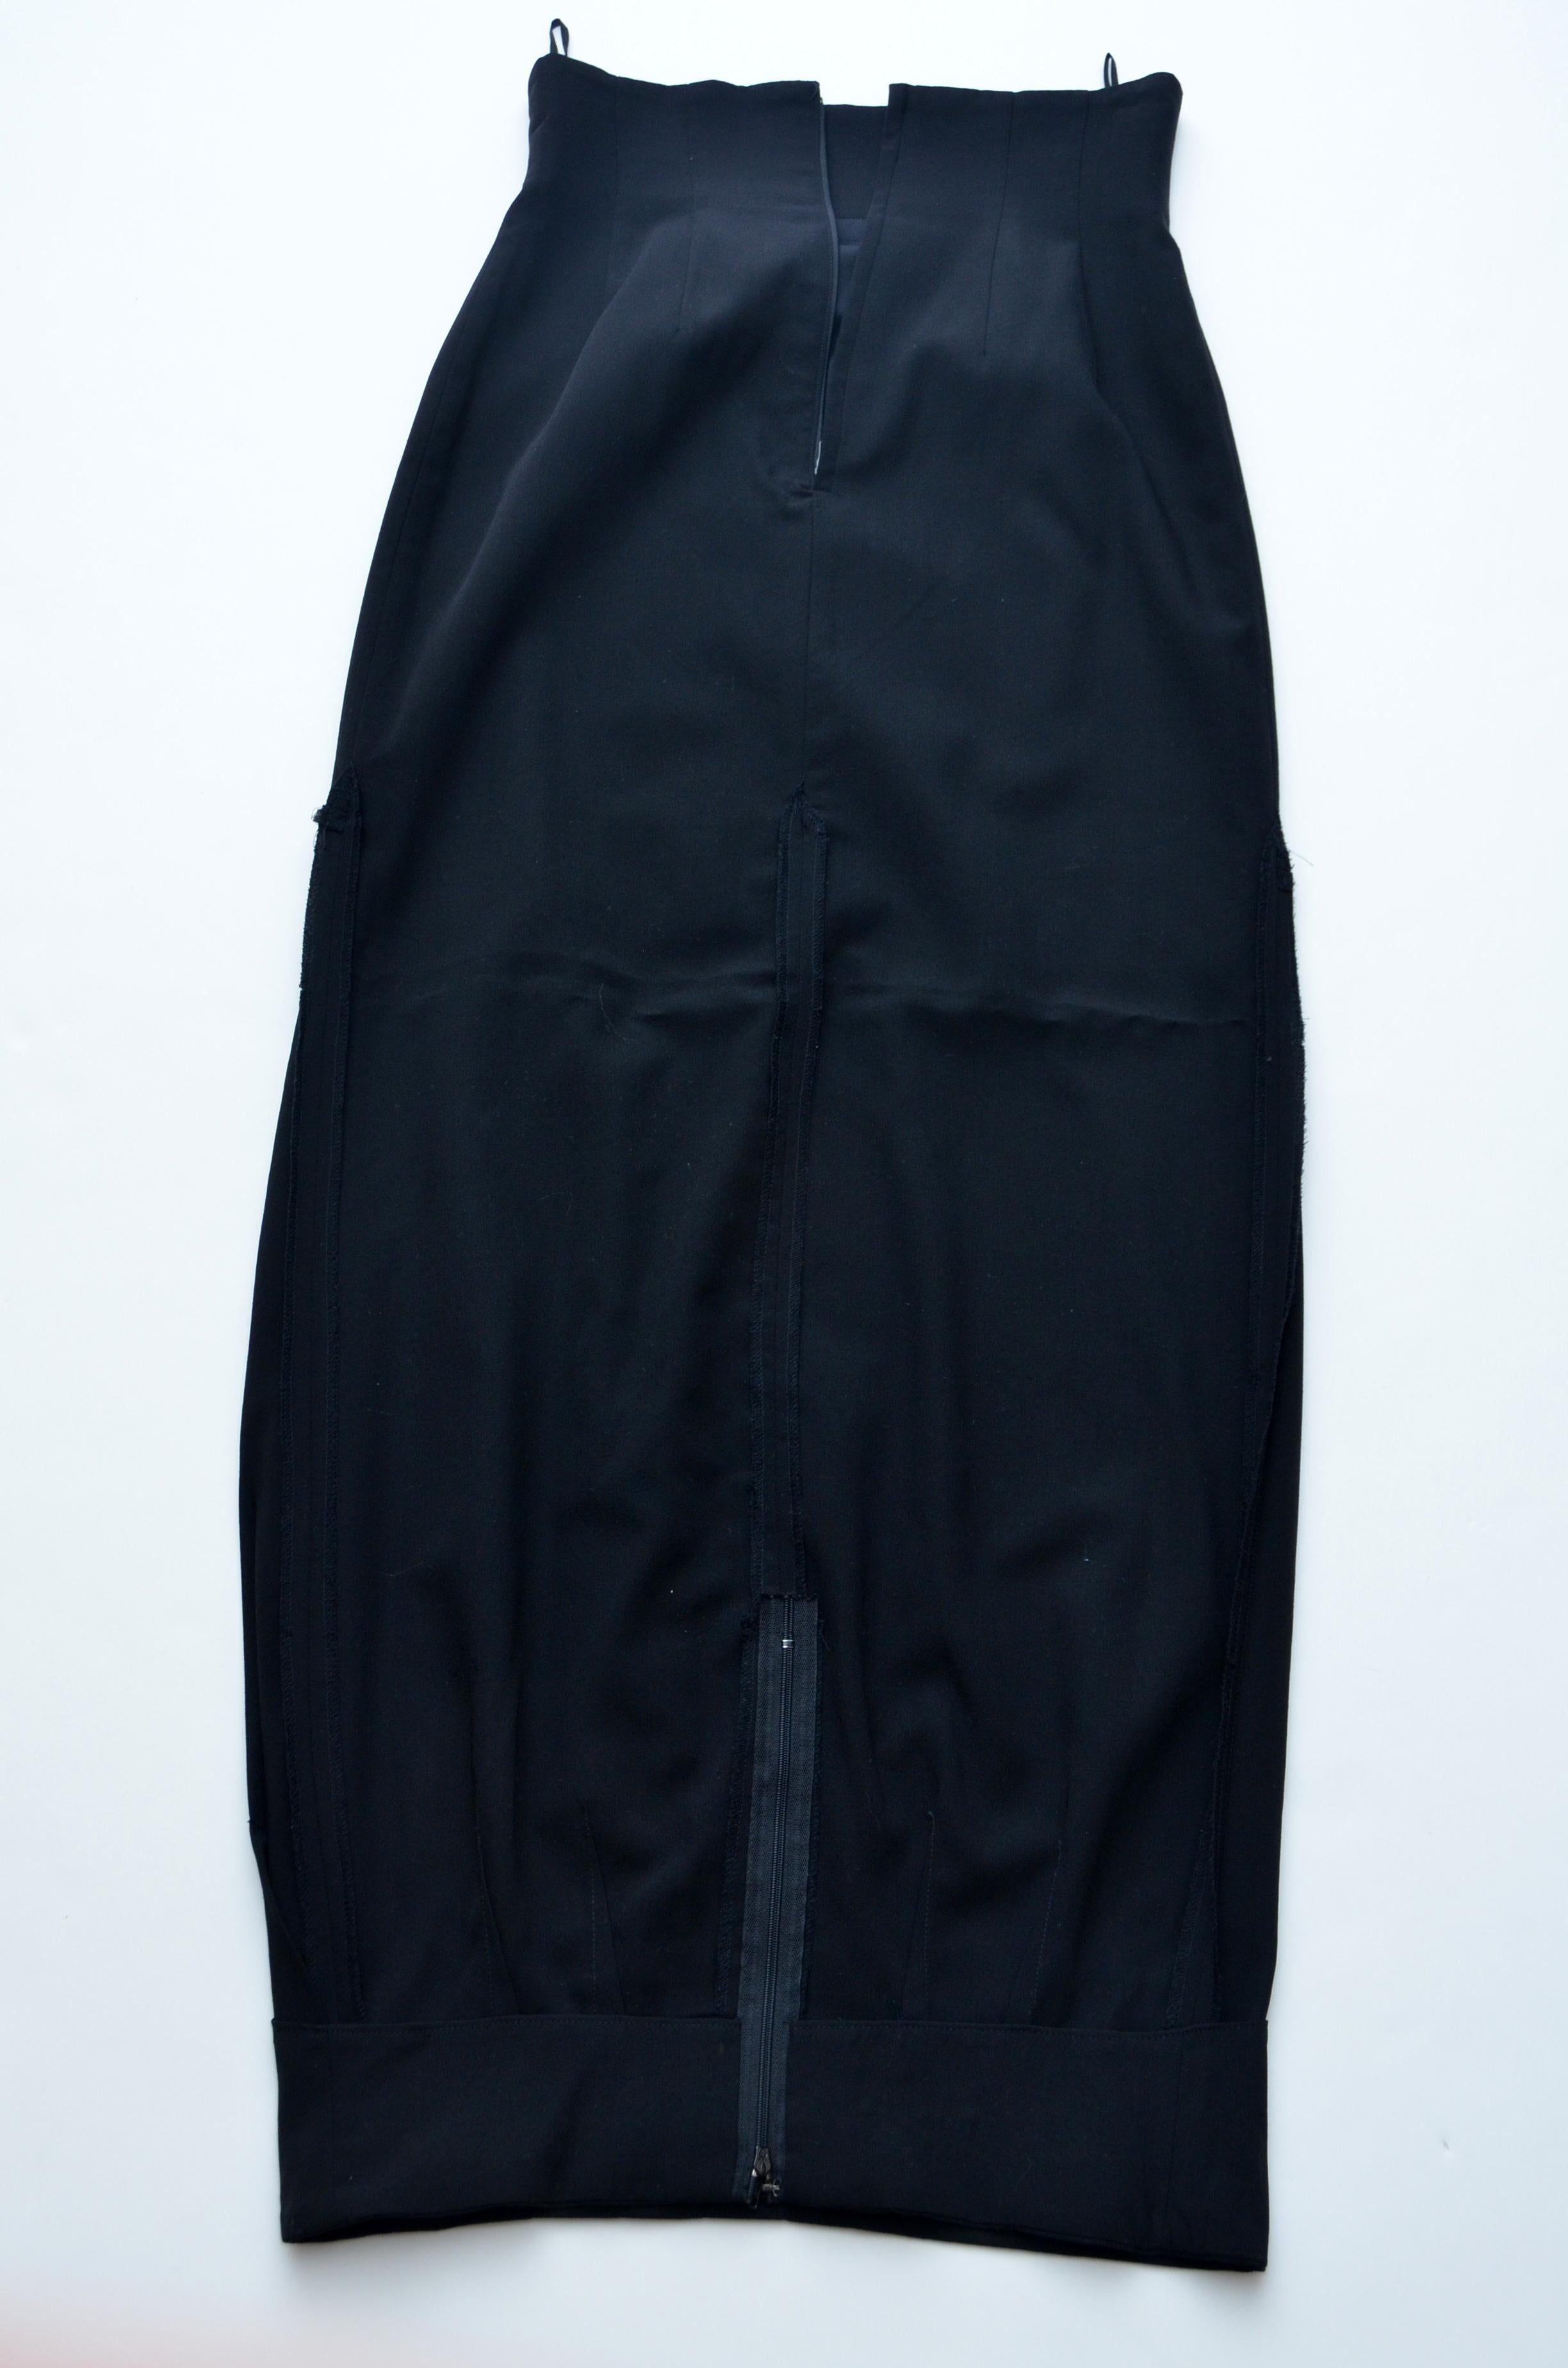 Rare Comme Des Garçons AD1990 Upside Down Long Black Skirt  
Top half of the skirt is lined and bottom in not.
Bottom and top have zipper.Top of the skirt has finished edges and bottom of has it unfinished.
Very unusual design  from Rei K early